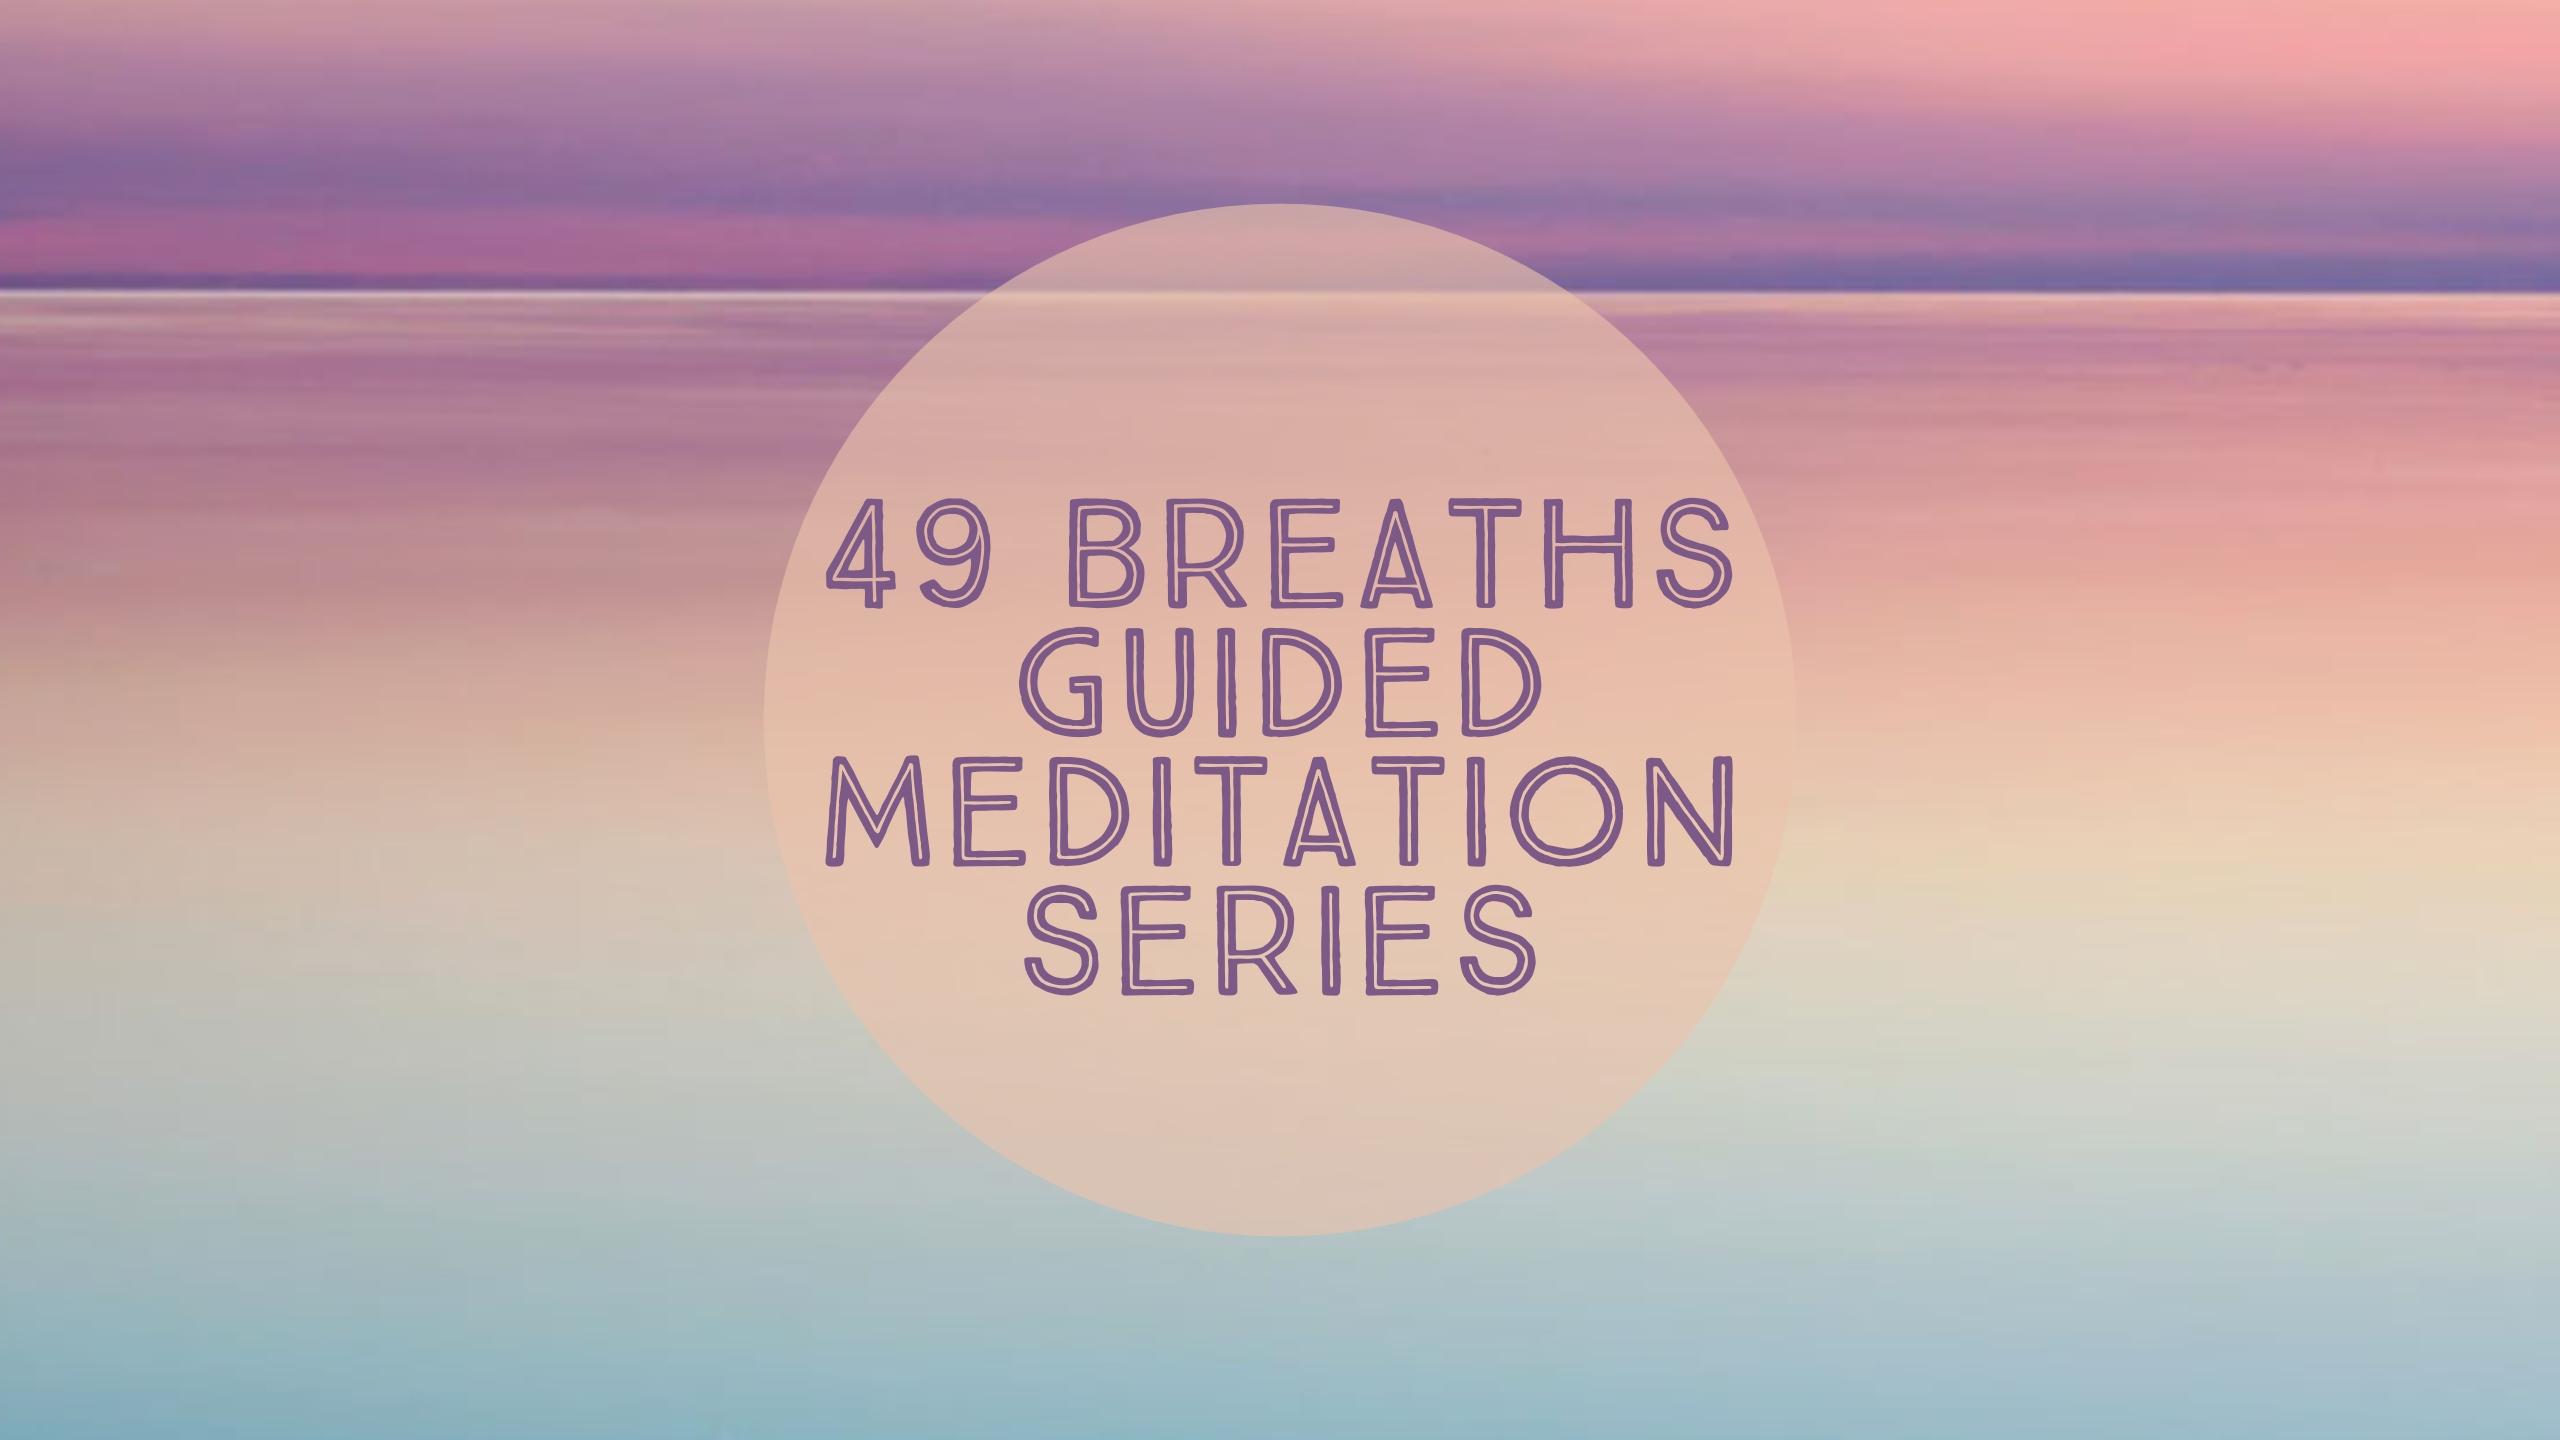 49 Breaths Guided Meditation Series